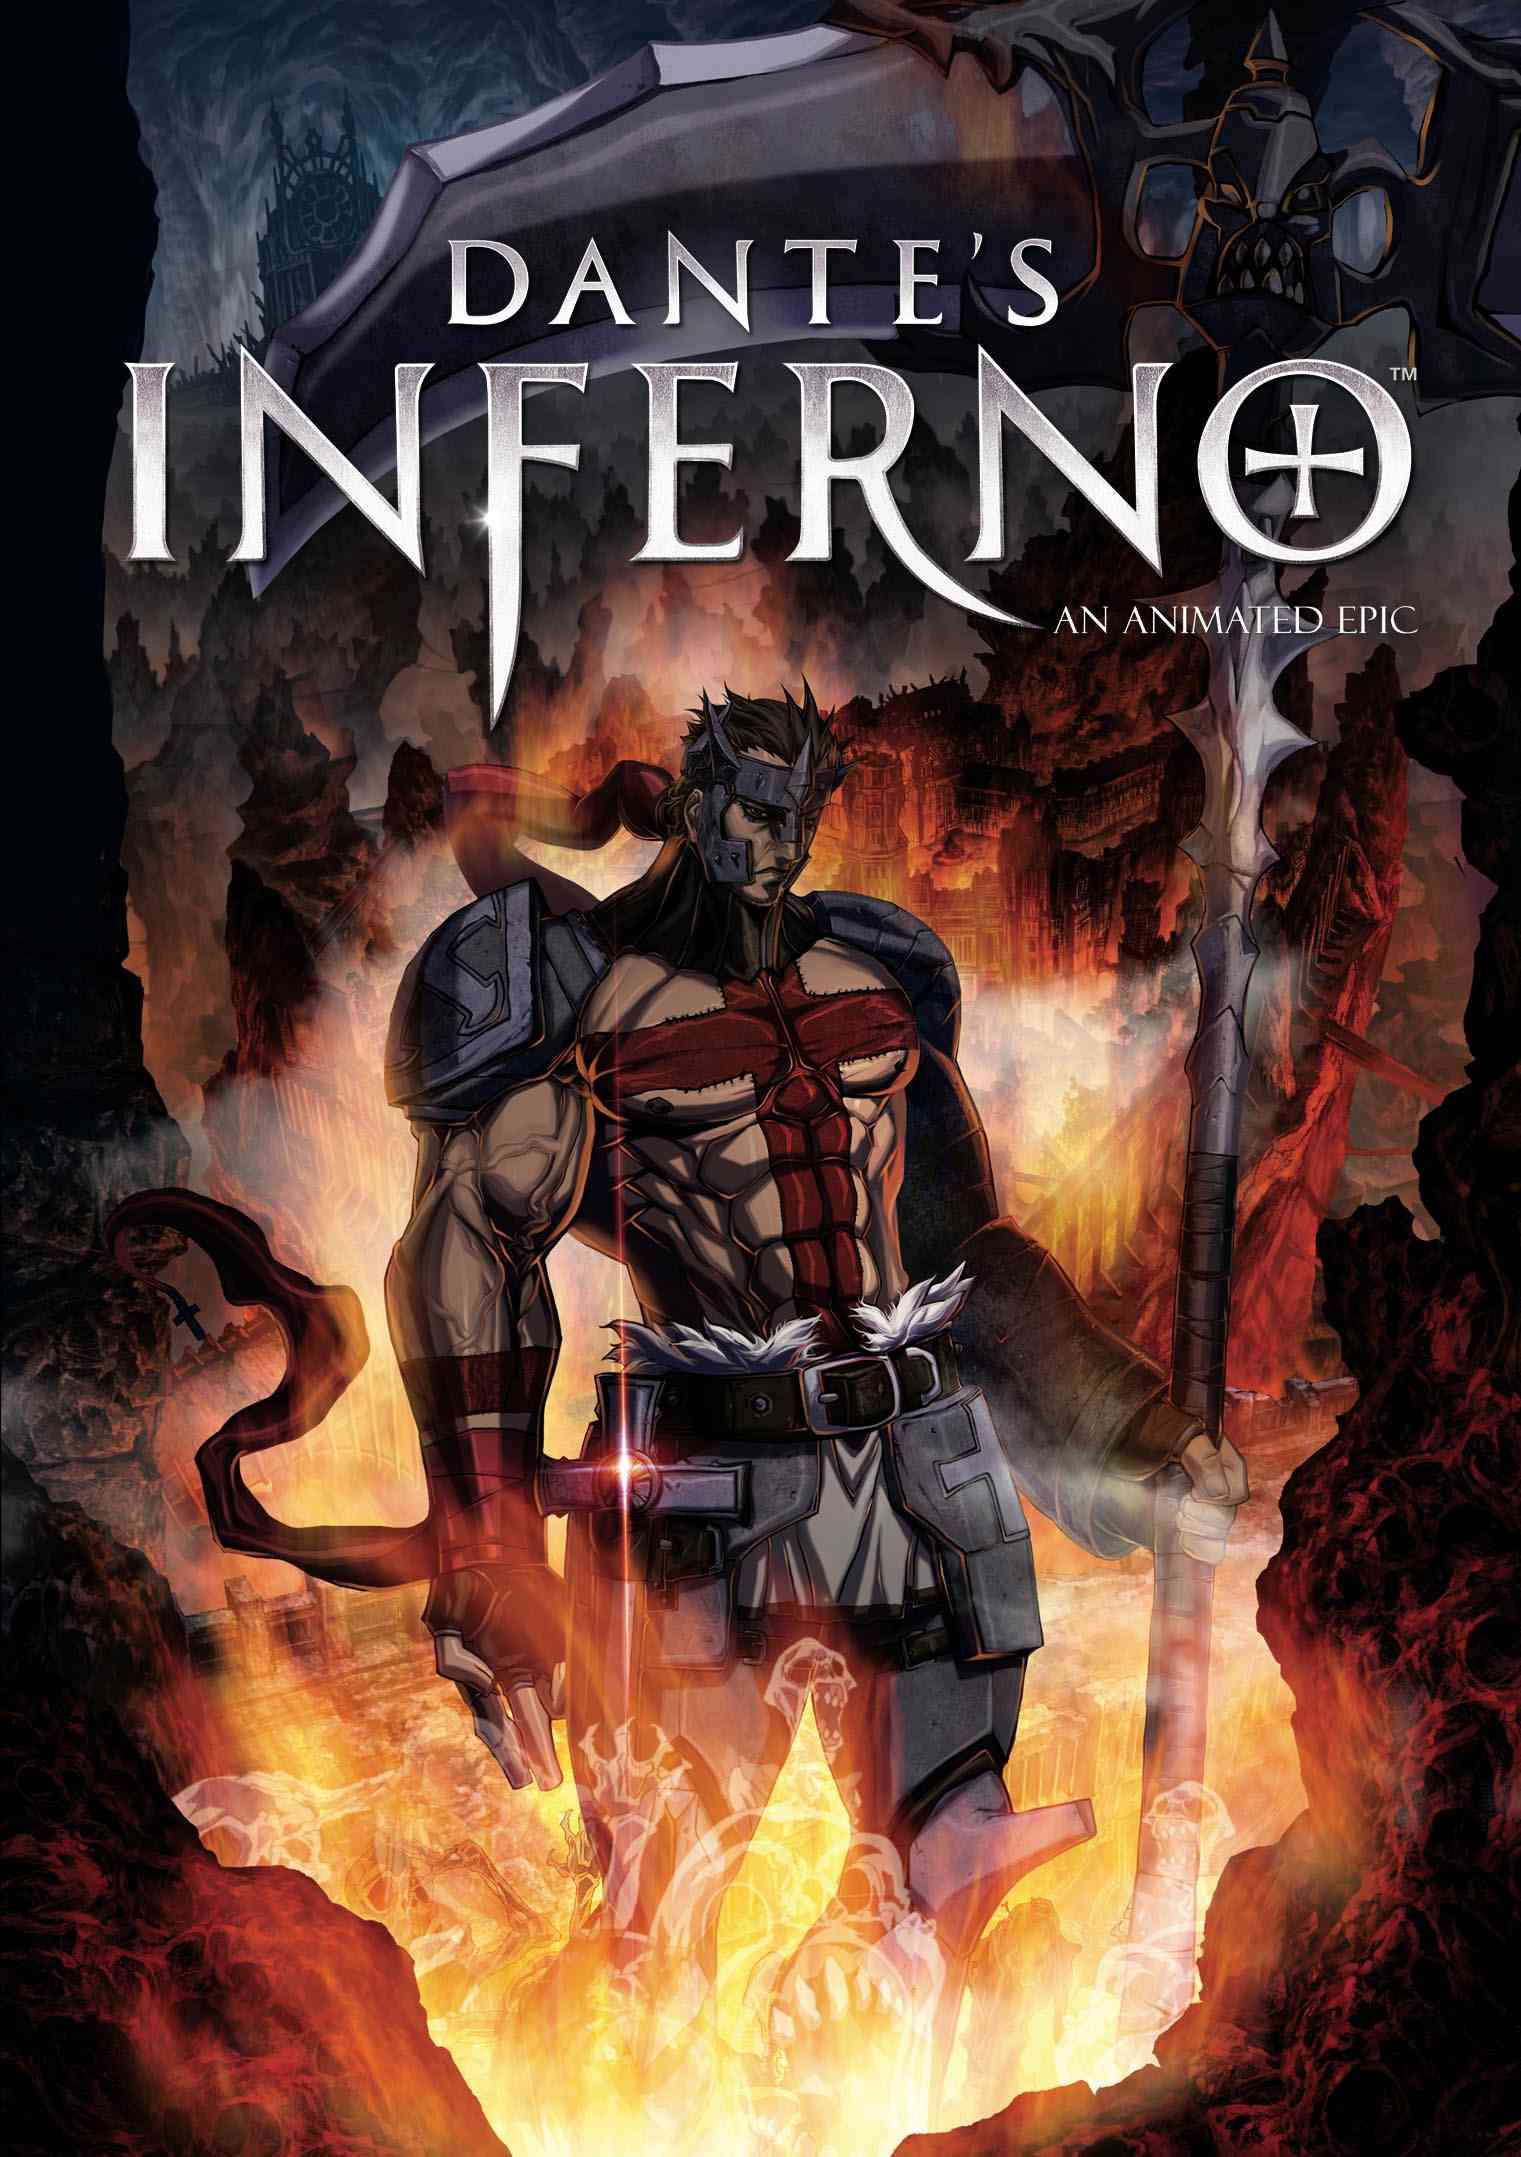 FULL MOVIE: Dante’s Inferno: An Animated Epic (2010) [Action]